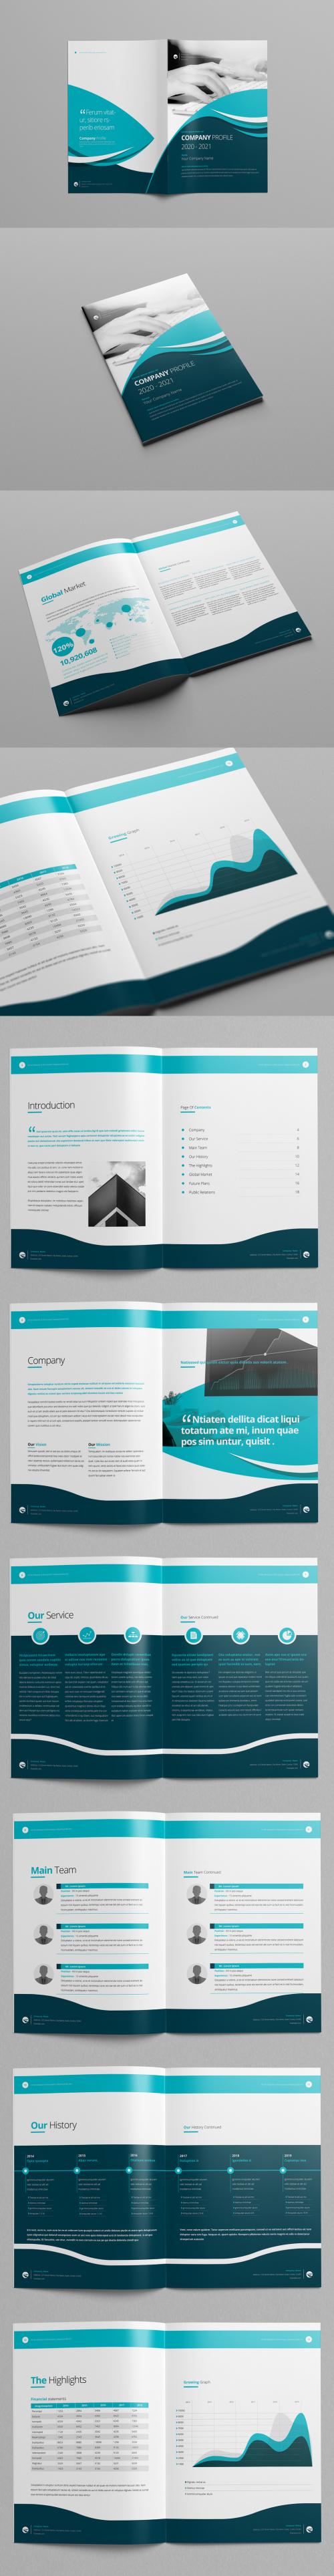 Adobe Stock - Company Profile Layout with Teal and Blue Accents - 220149458